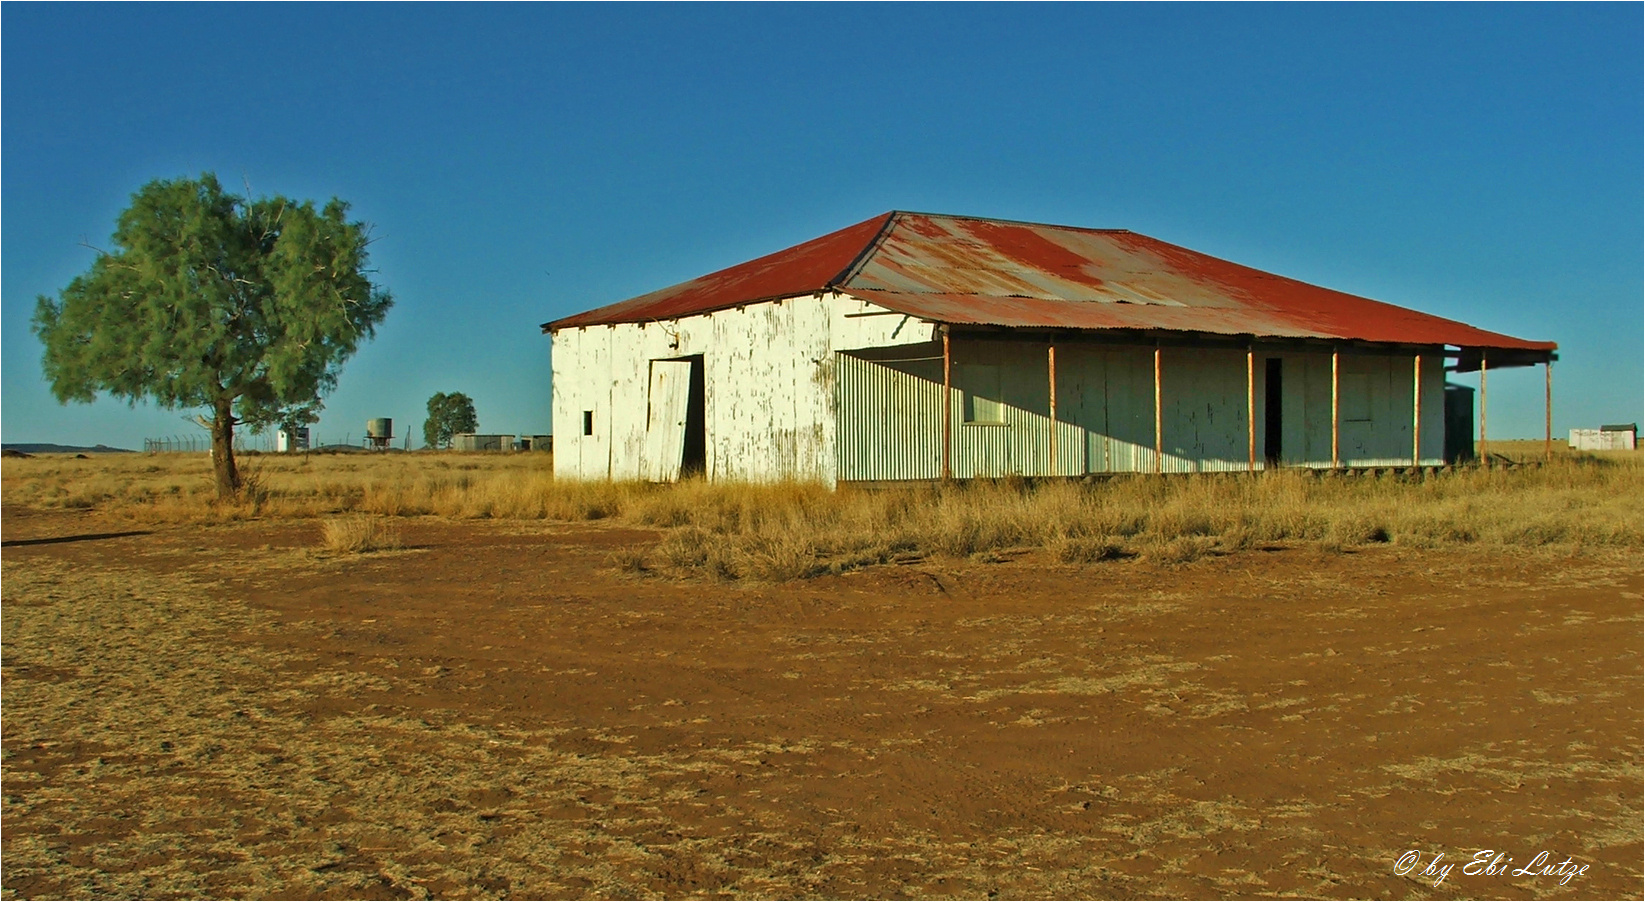 ** The old Shearing Shed **